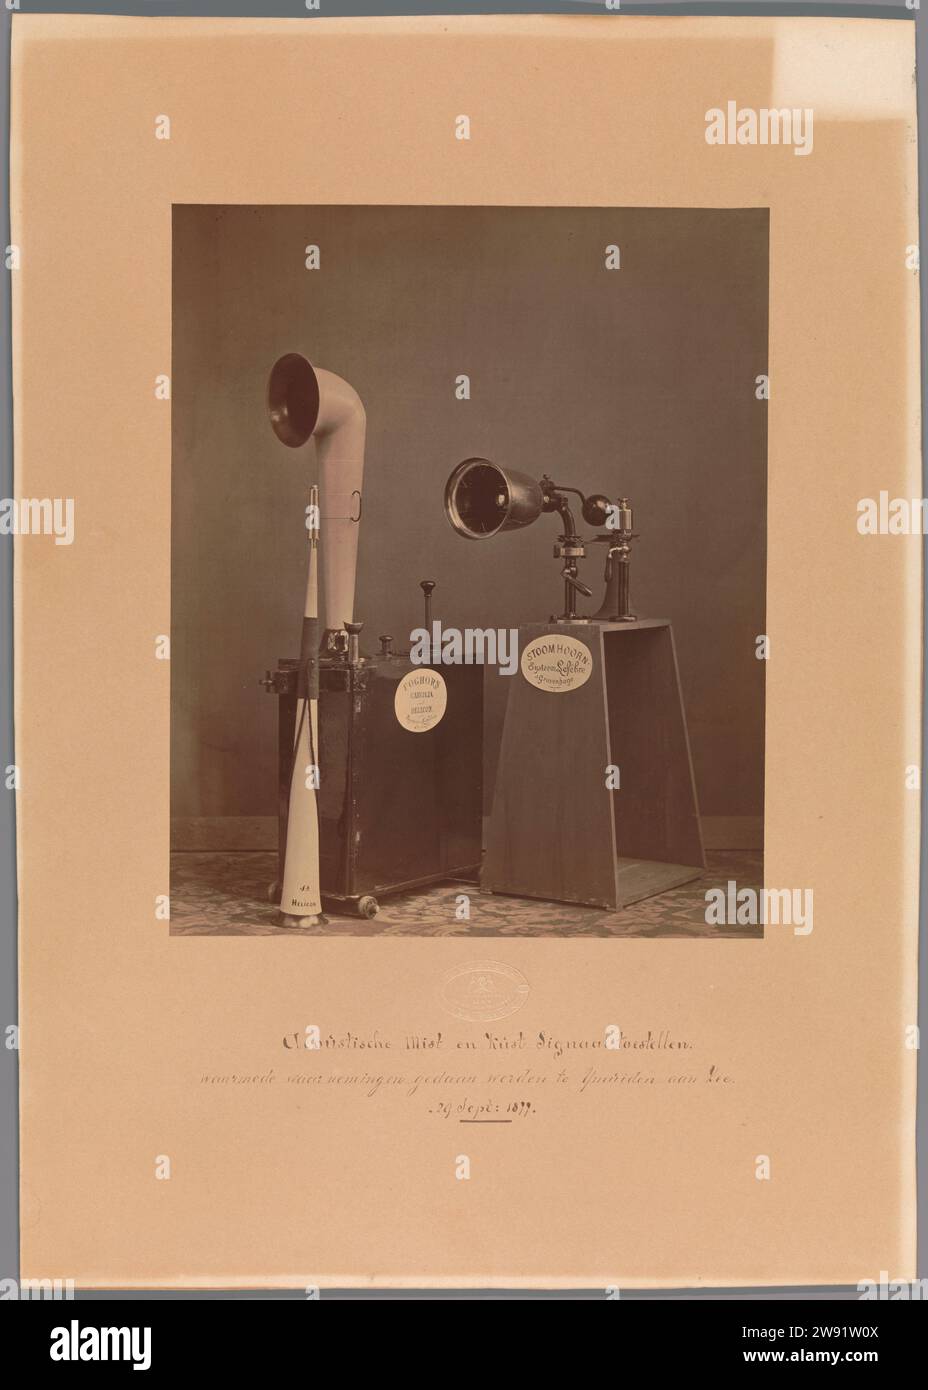 Three Signalling Horns, Maurits Verveer, 1877 photograph Three signal horns against a dark background. One is a simple trumpet -shaped fog horn with a mouthpiece and carries the inscription '1a / Helicon'. The other two consist of a cupboard where the horn sticks to the top: the left horn, which the inscription 'Foghorn /' Caecilia / And / Helicon. / Systeme Lefebre / The Hague 'wears a mouthpiece; The other is a steam horn with inscription 'Stoomhoorn Sijsteem Lefèbre. / s Gravenhage. ' The Hague paper   The Hague Stock Photo